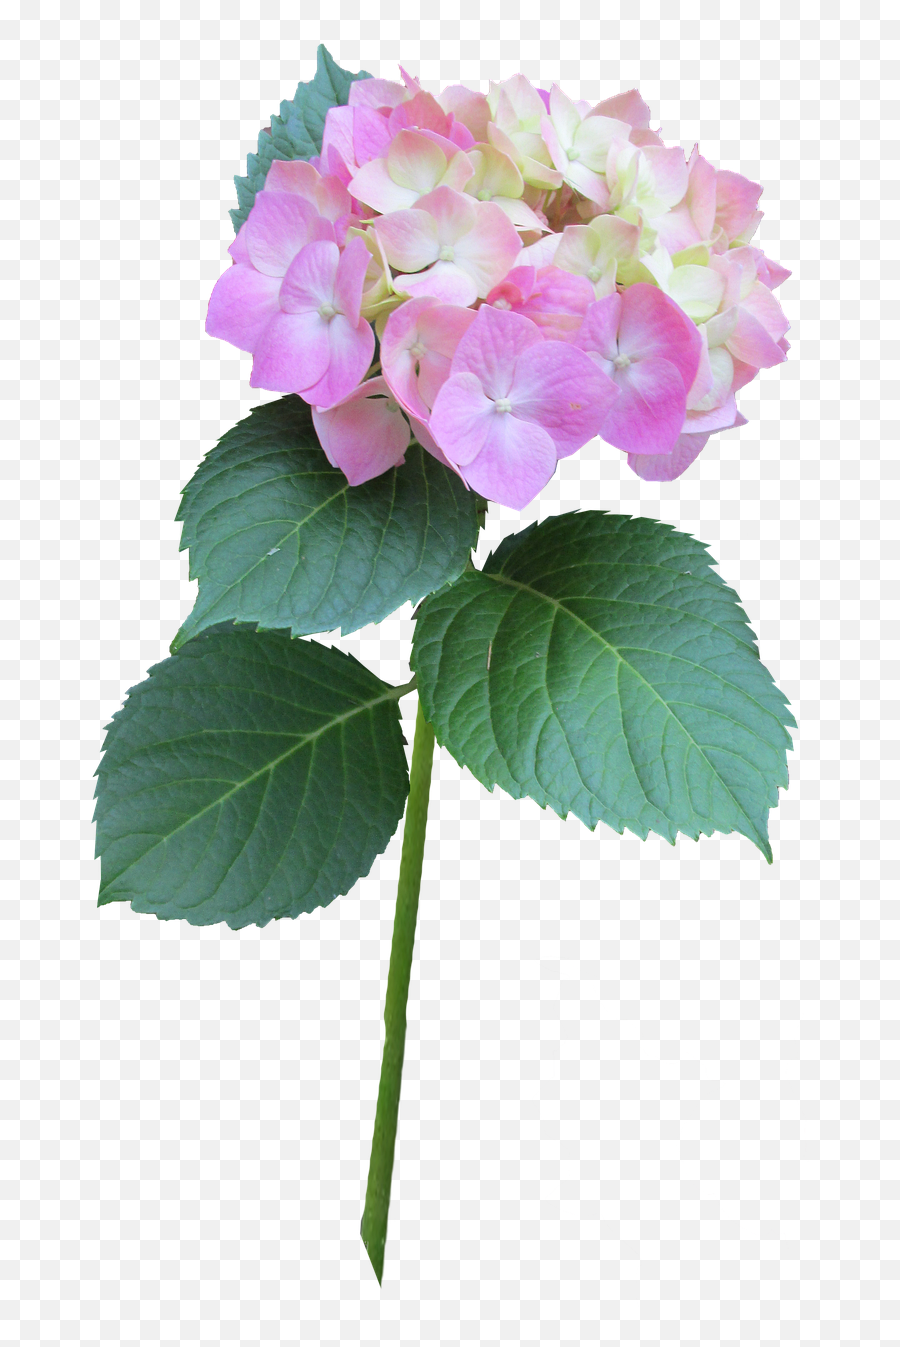 Hydrangea Pink Stem Free Pictures - Hydrangea Flower Plant Png Hydrangea Paniculata Pink Lady Tubes Transparent,Hydrangea Png